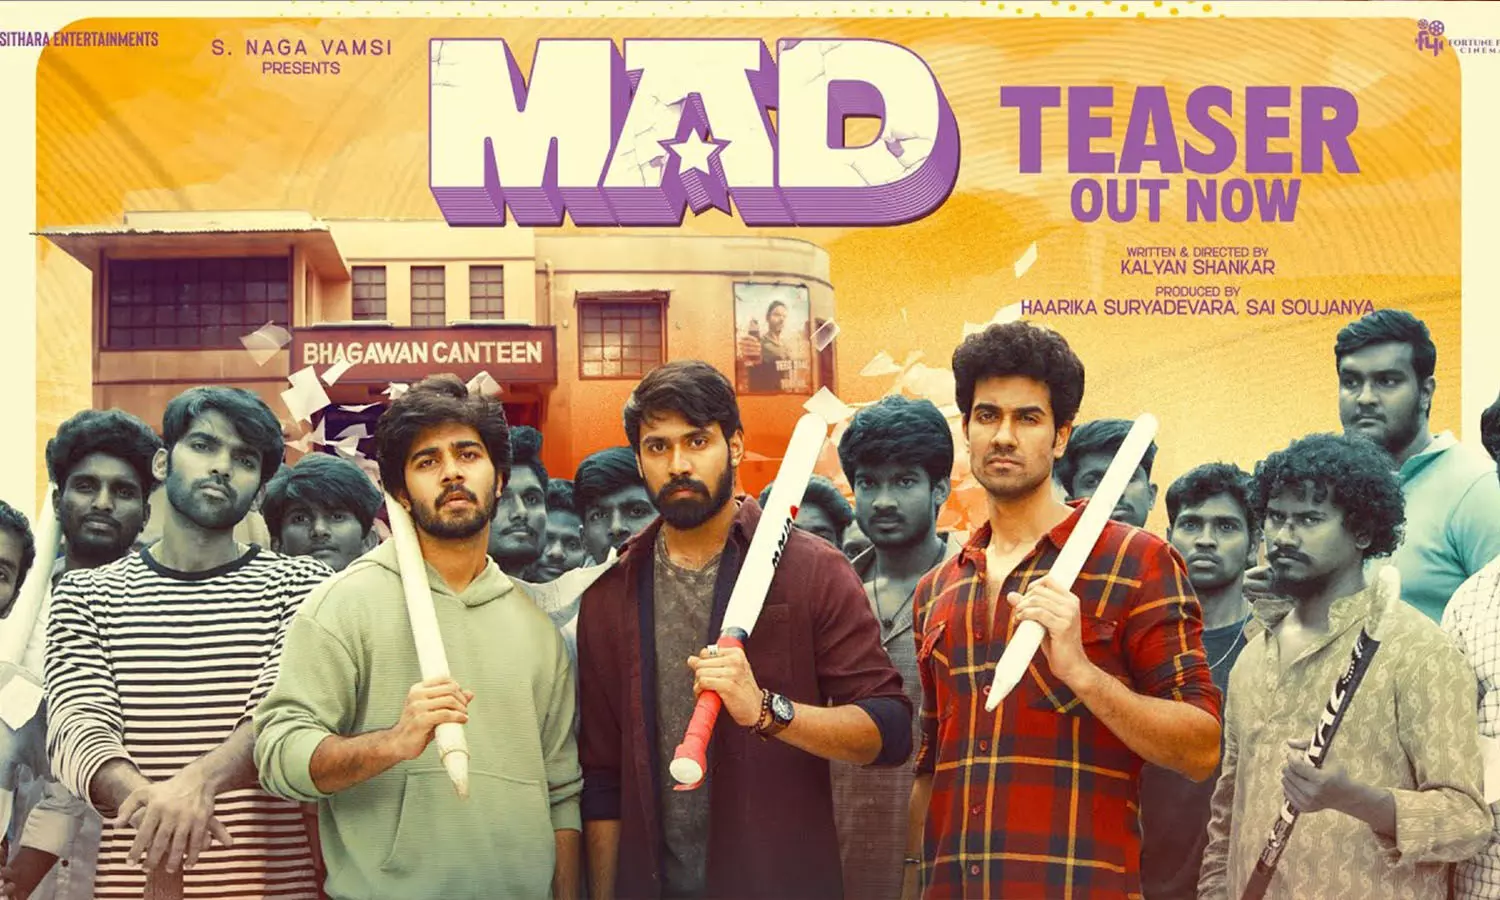 MAD Teaser: Youthful Entertainer laced with strong writing